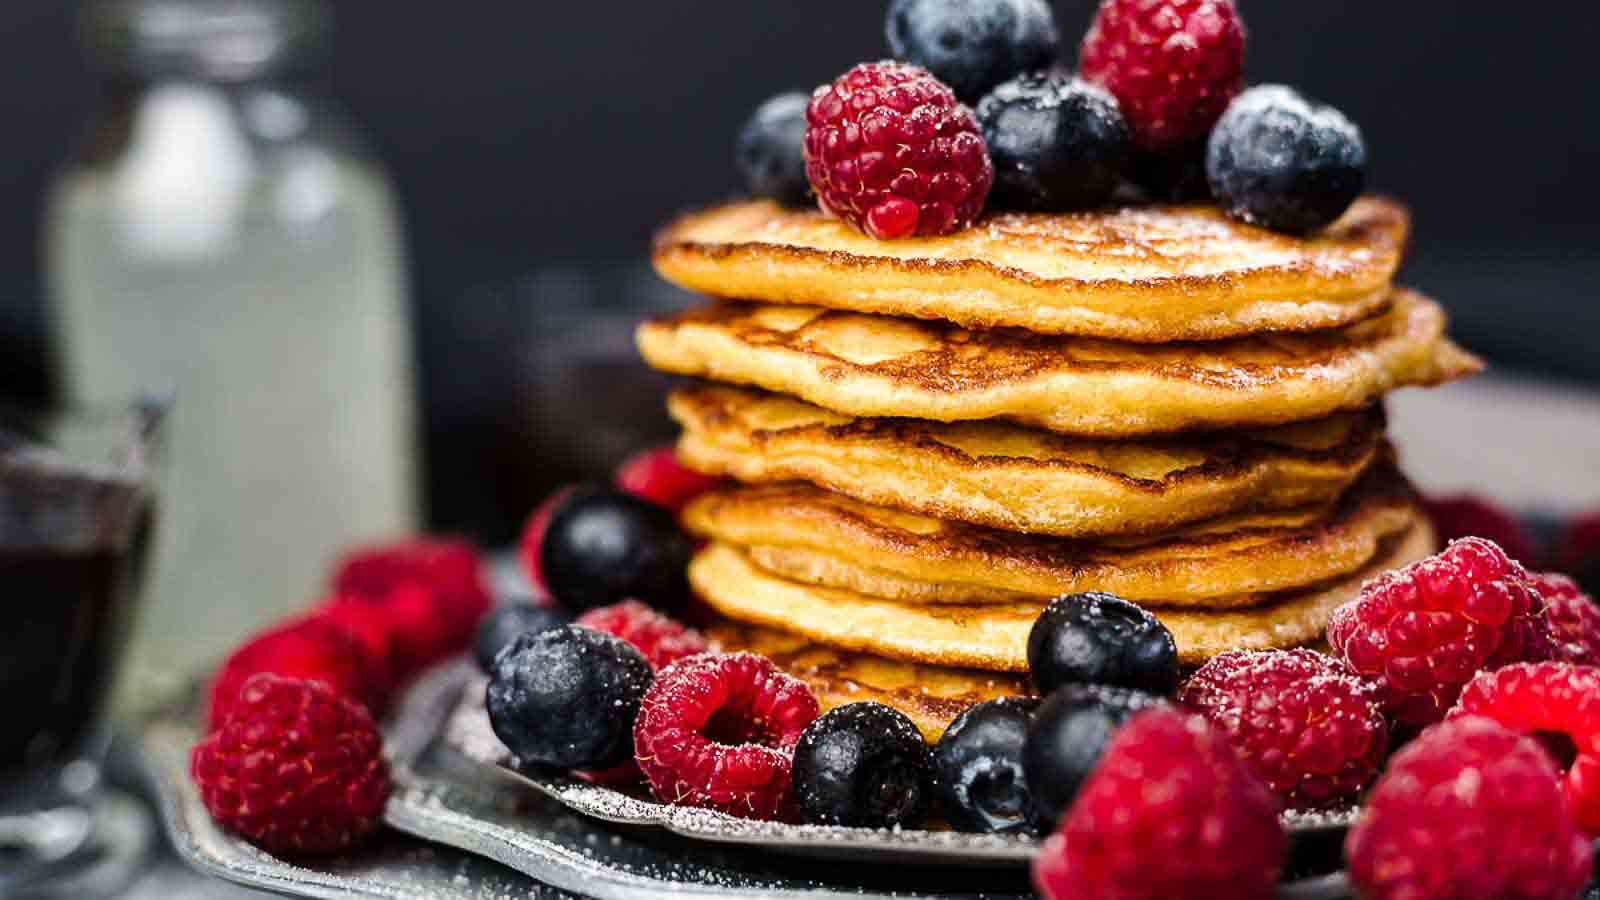 A stack of pancakes with blueberries and raspberries.